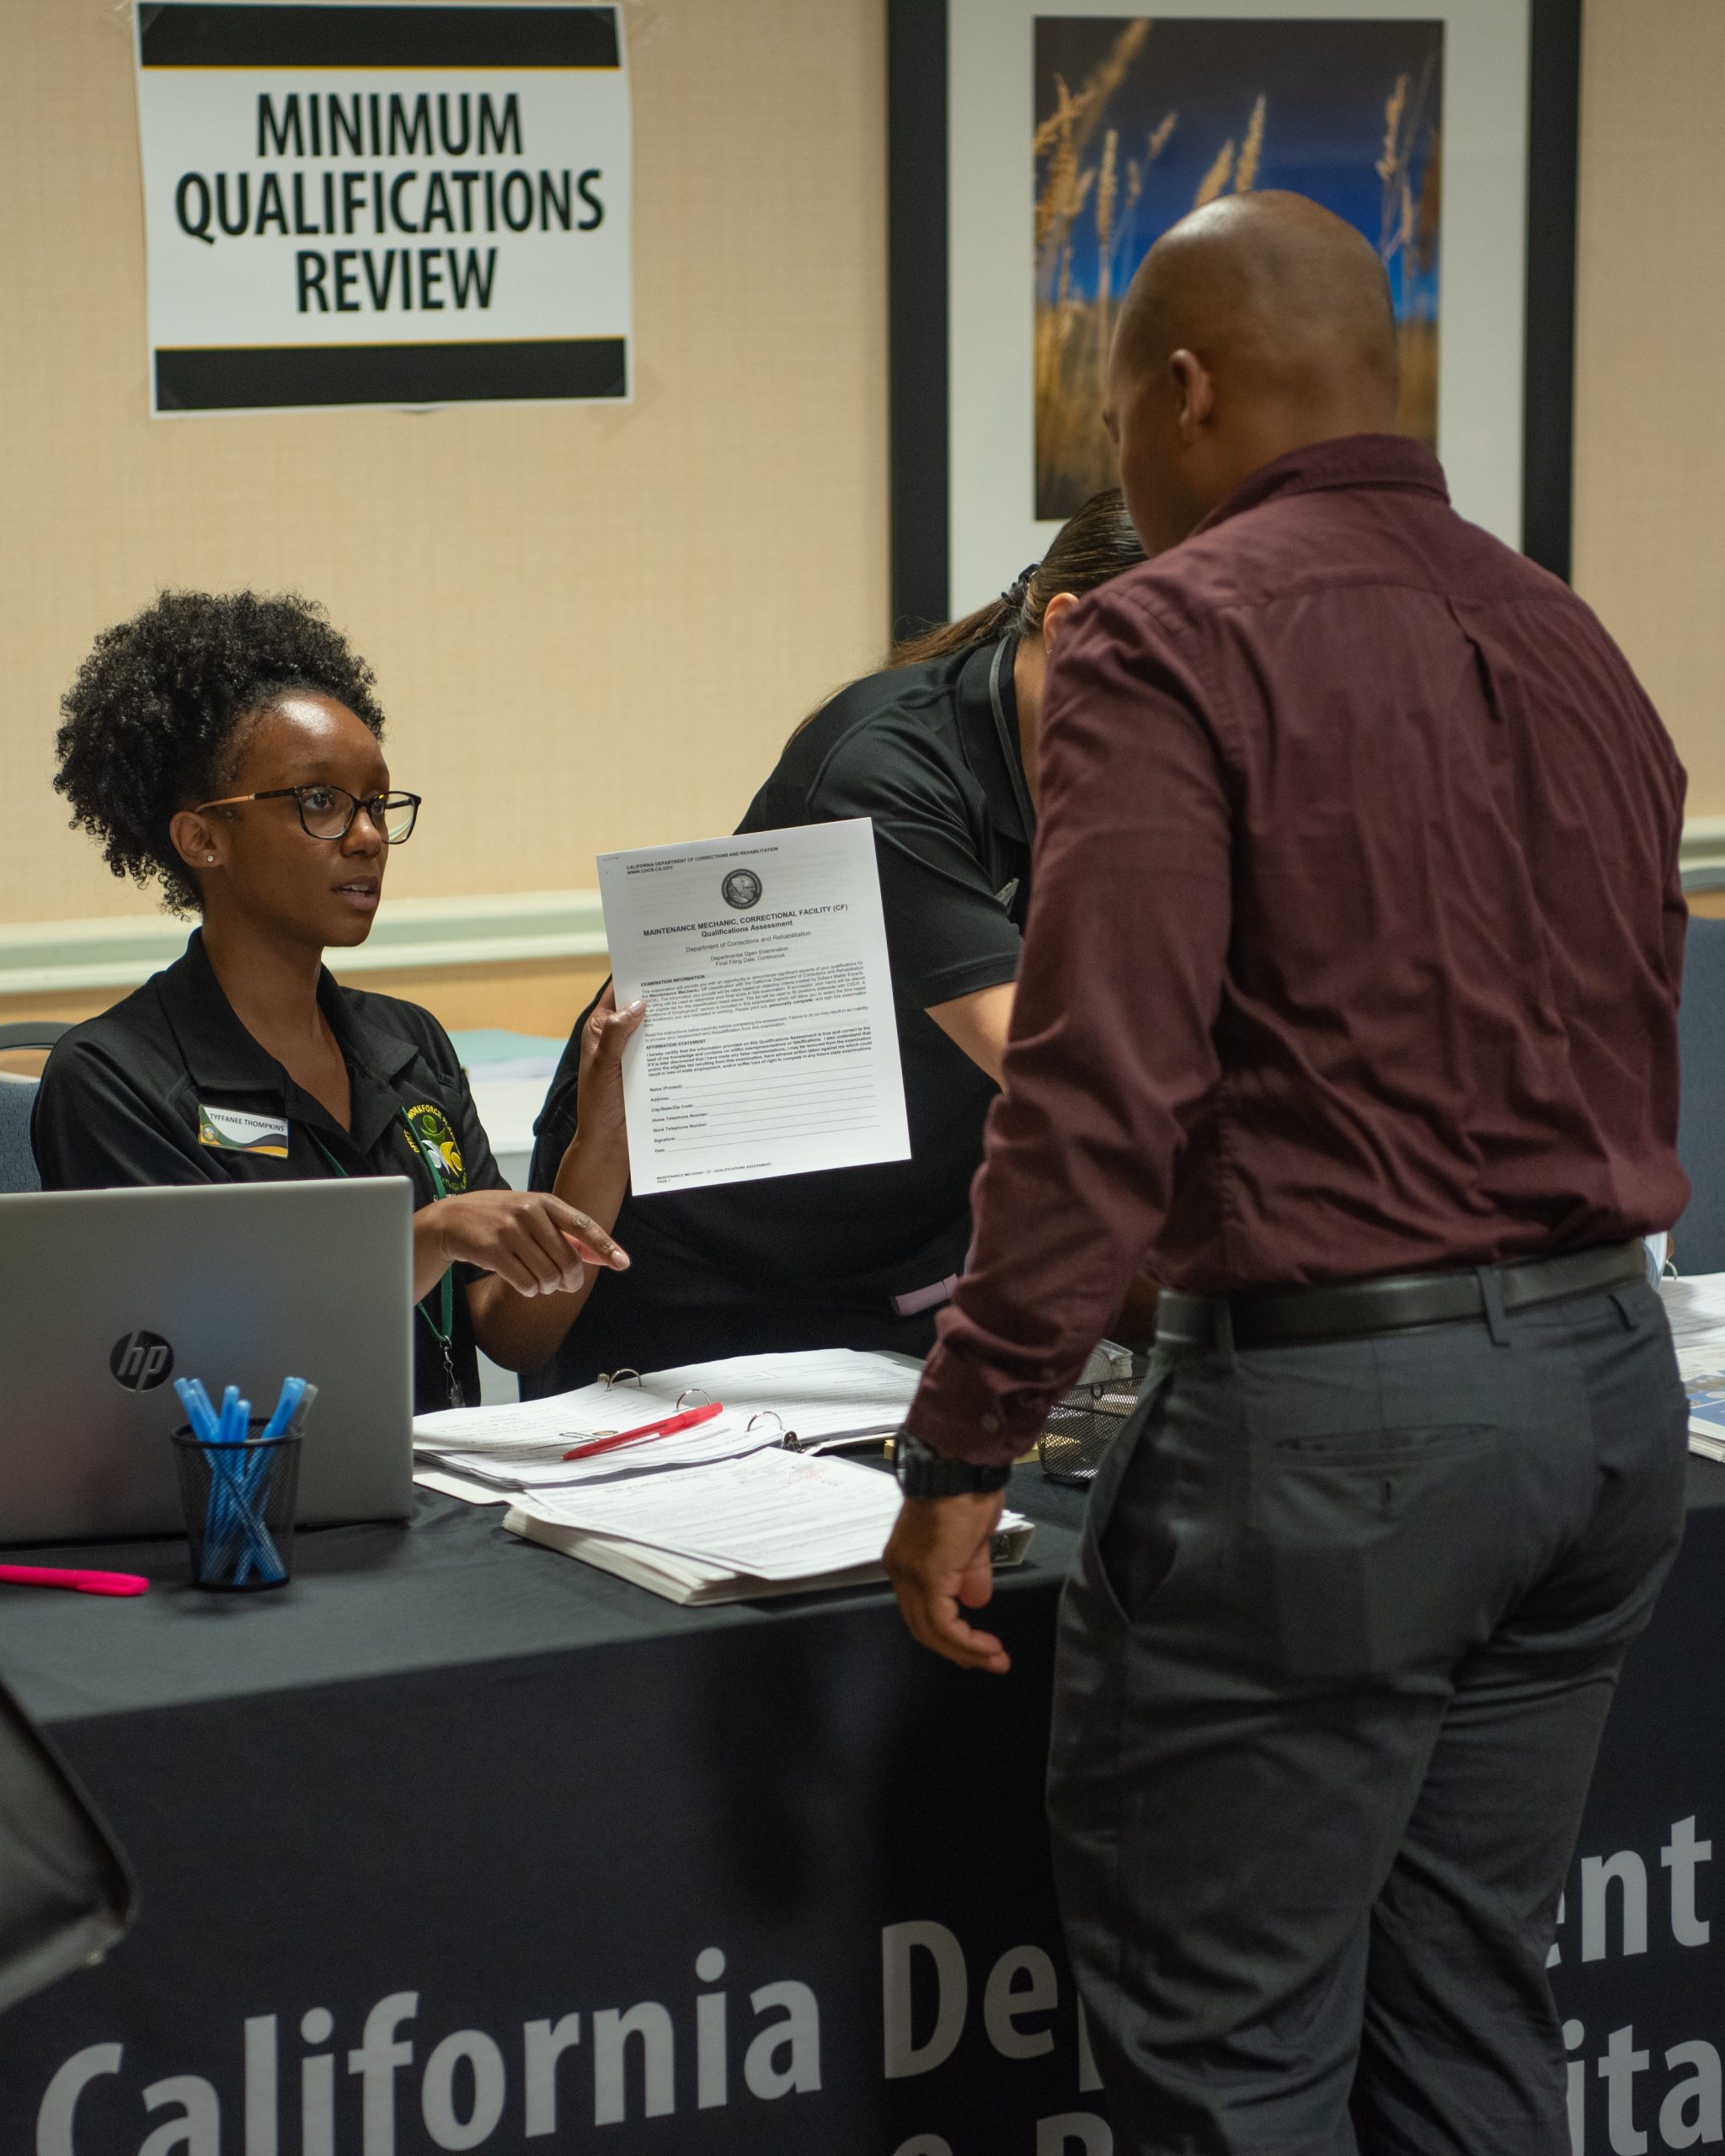 A woman holding a piece of paper speaks to a man at a booth during a hiring event.